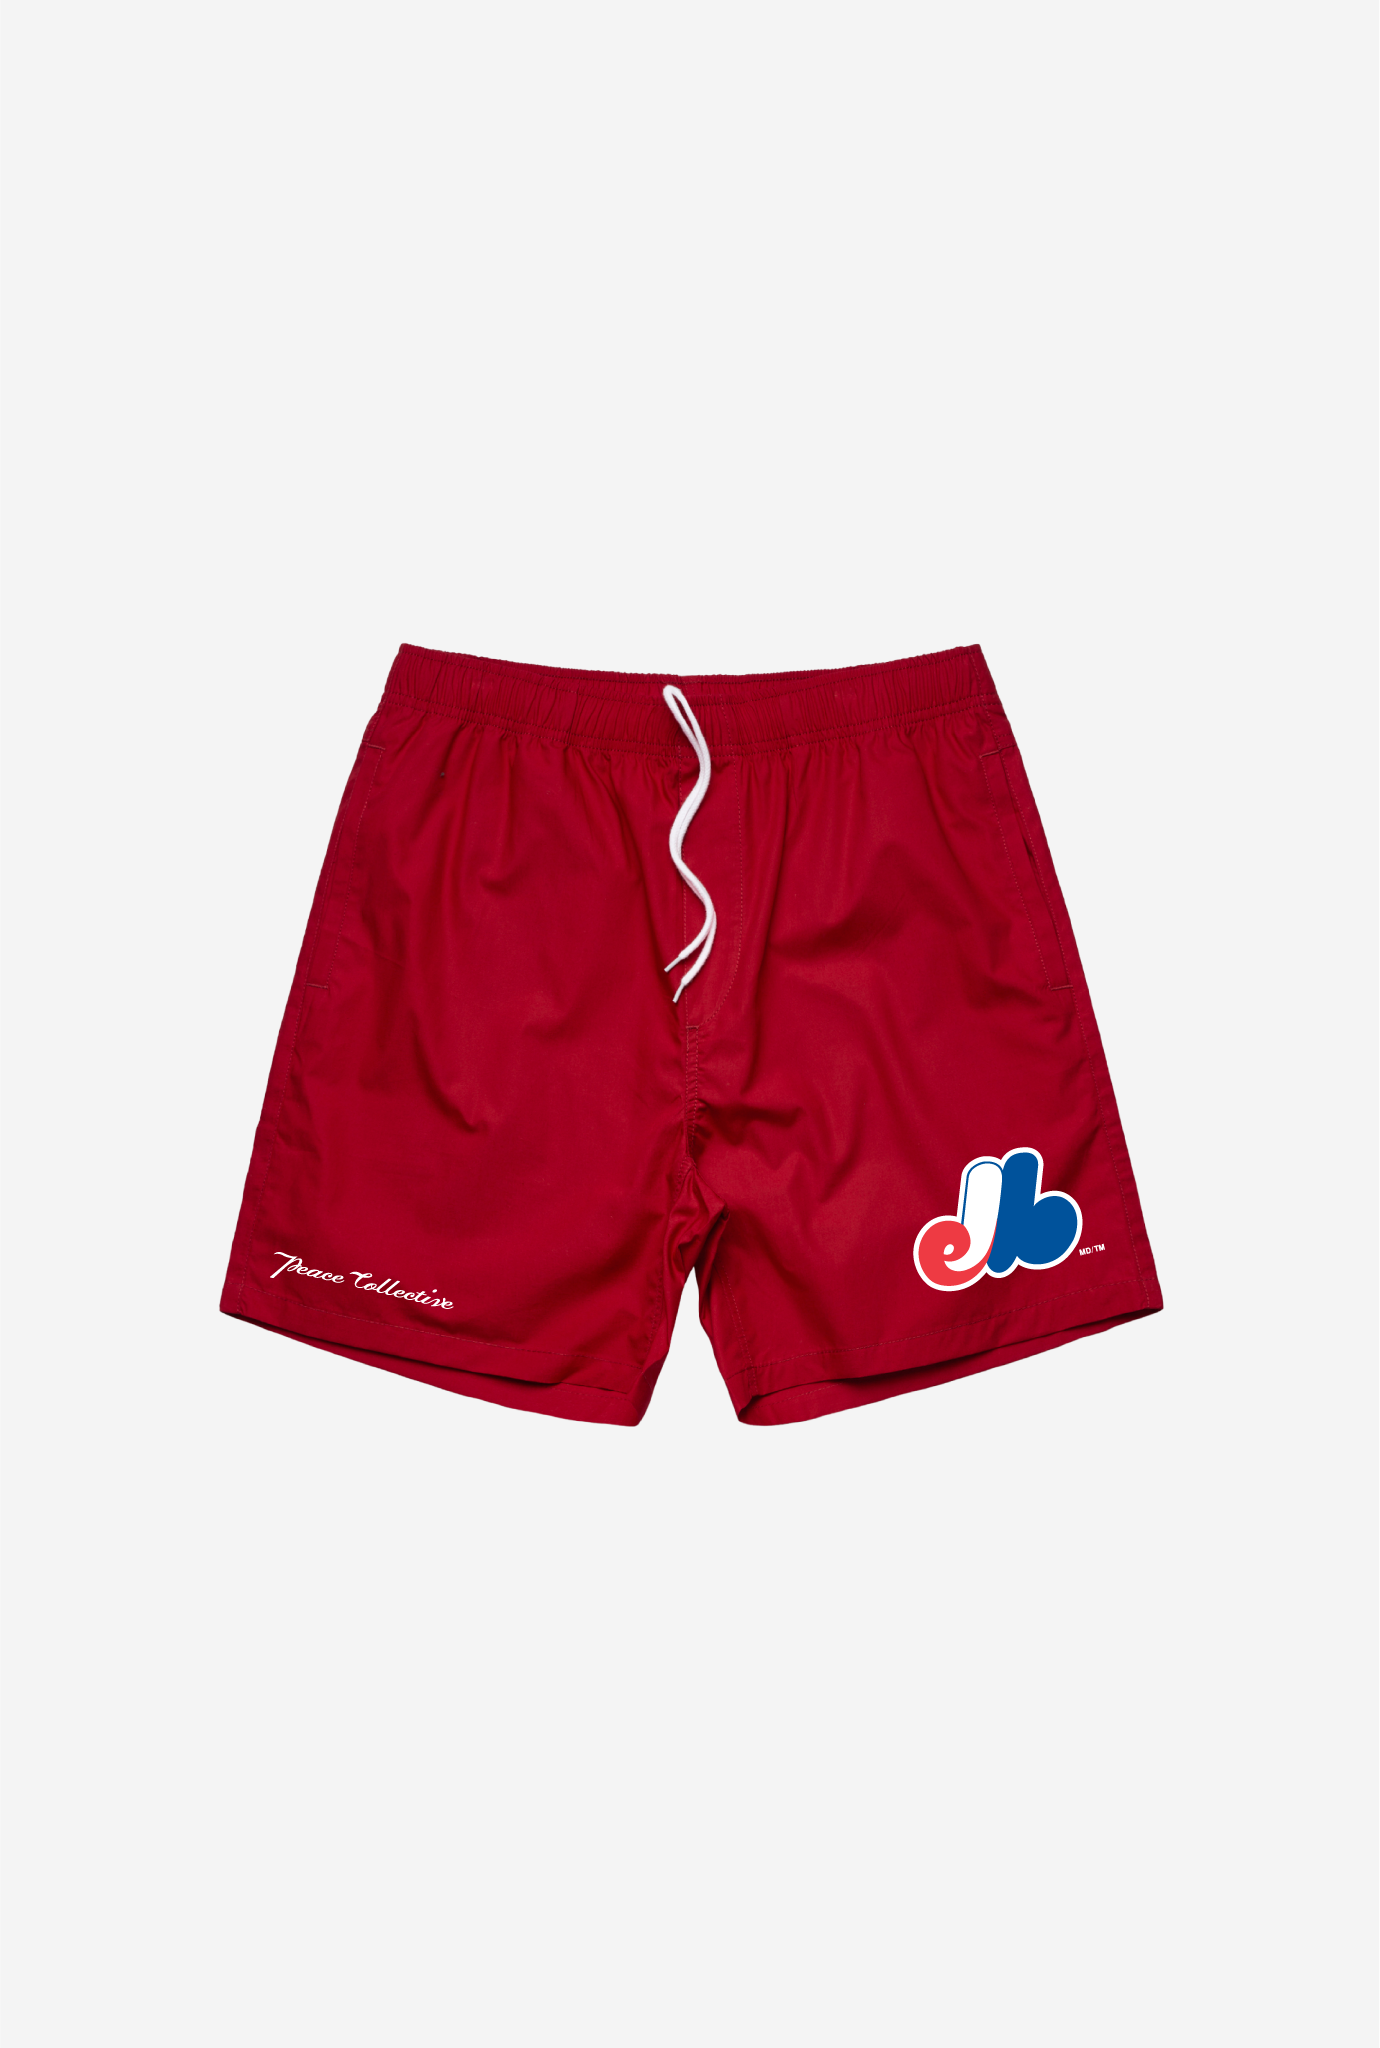 Montreal Expos Shorts - Red